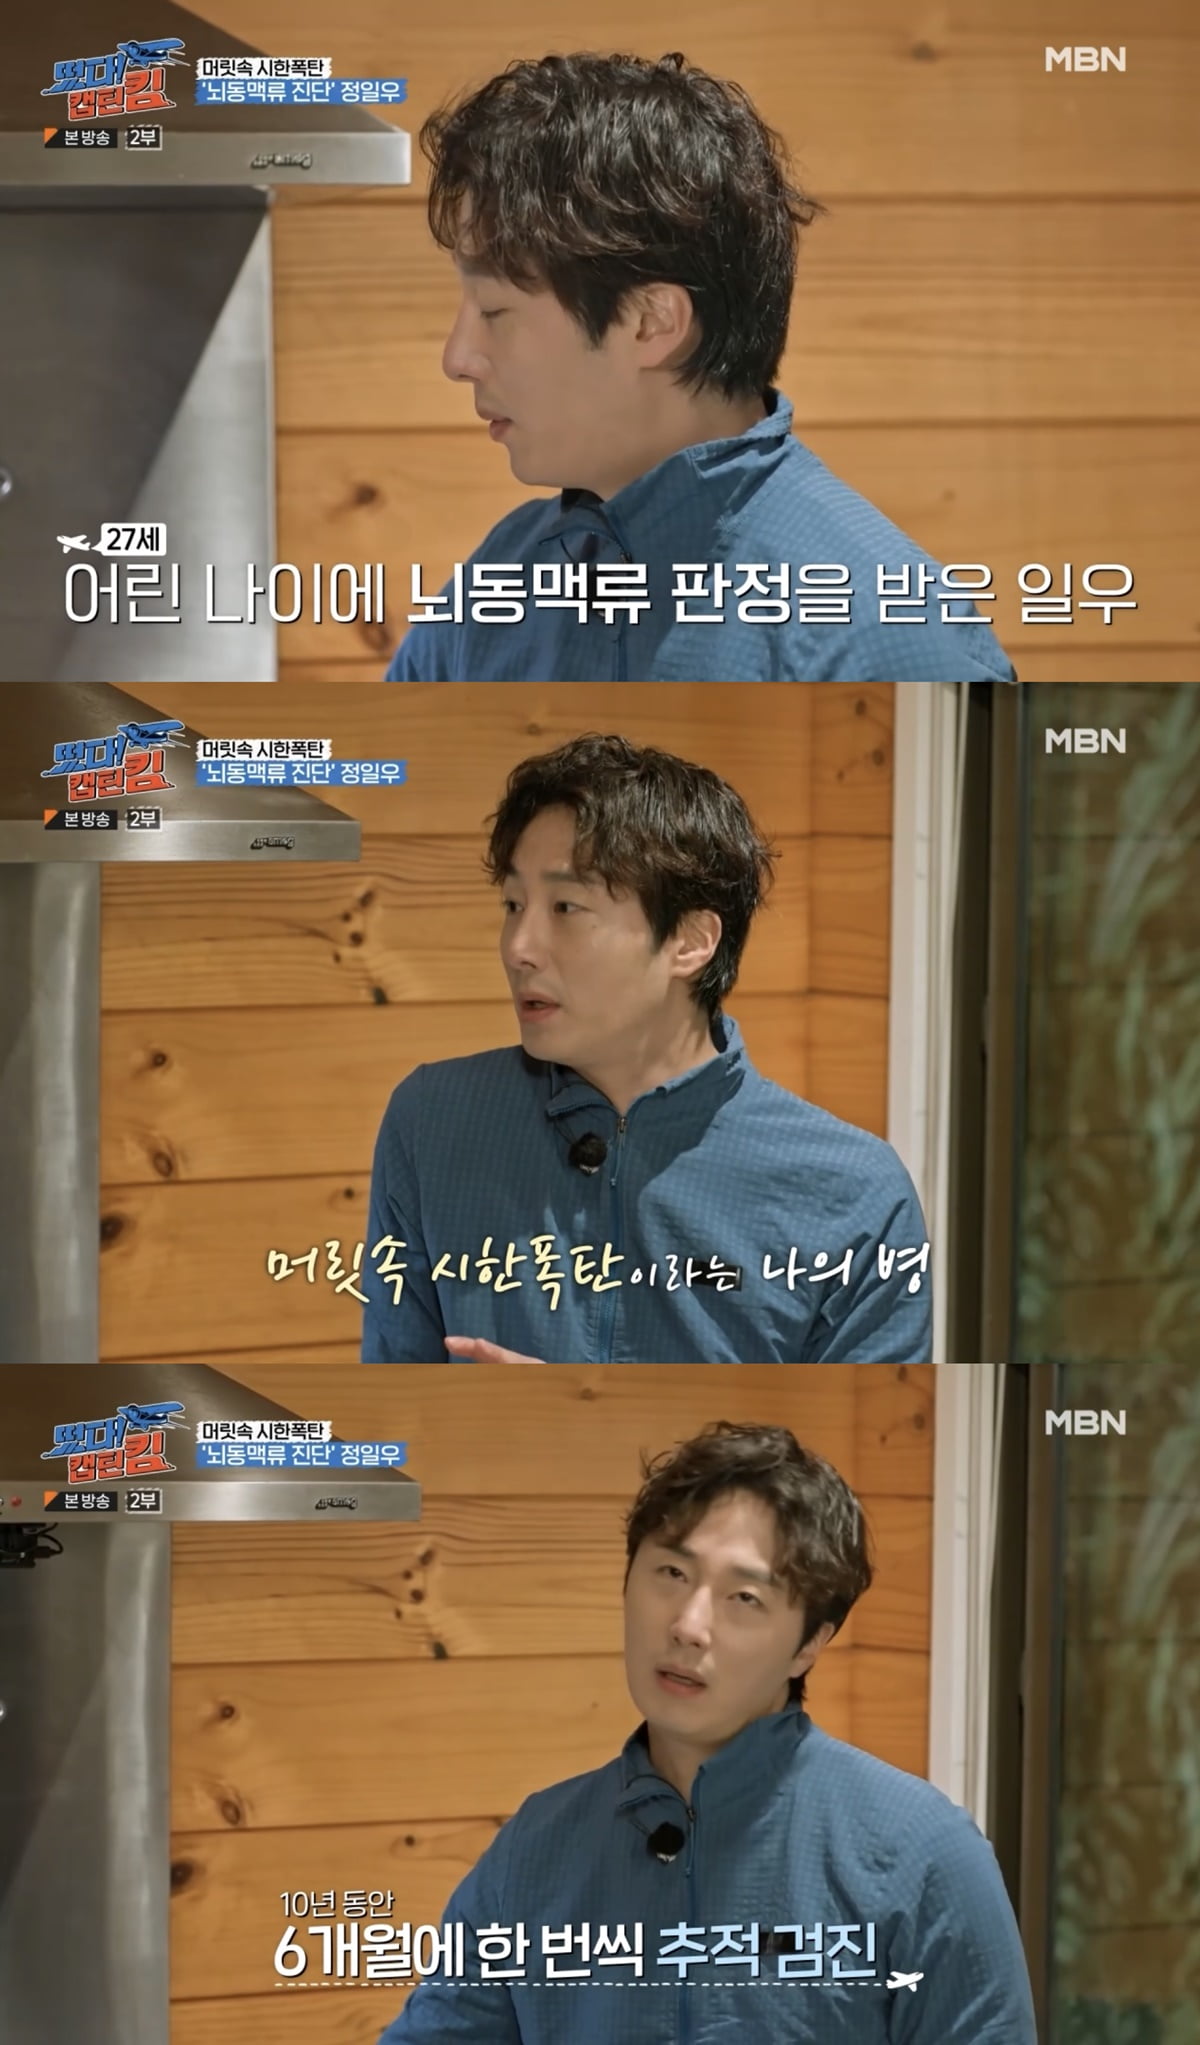 Jung Il-woo "I accept the shock of a cerebral aneurysm and live with it"